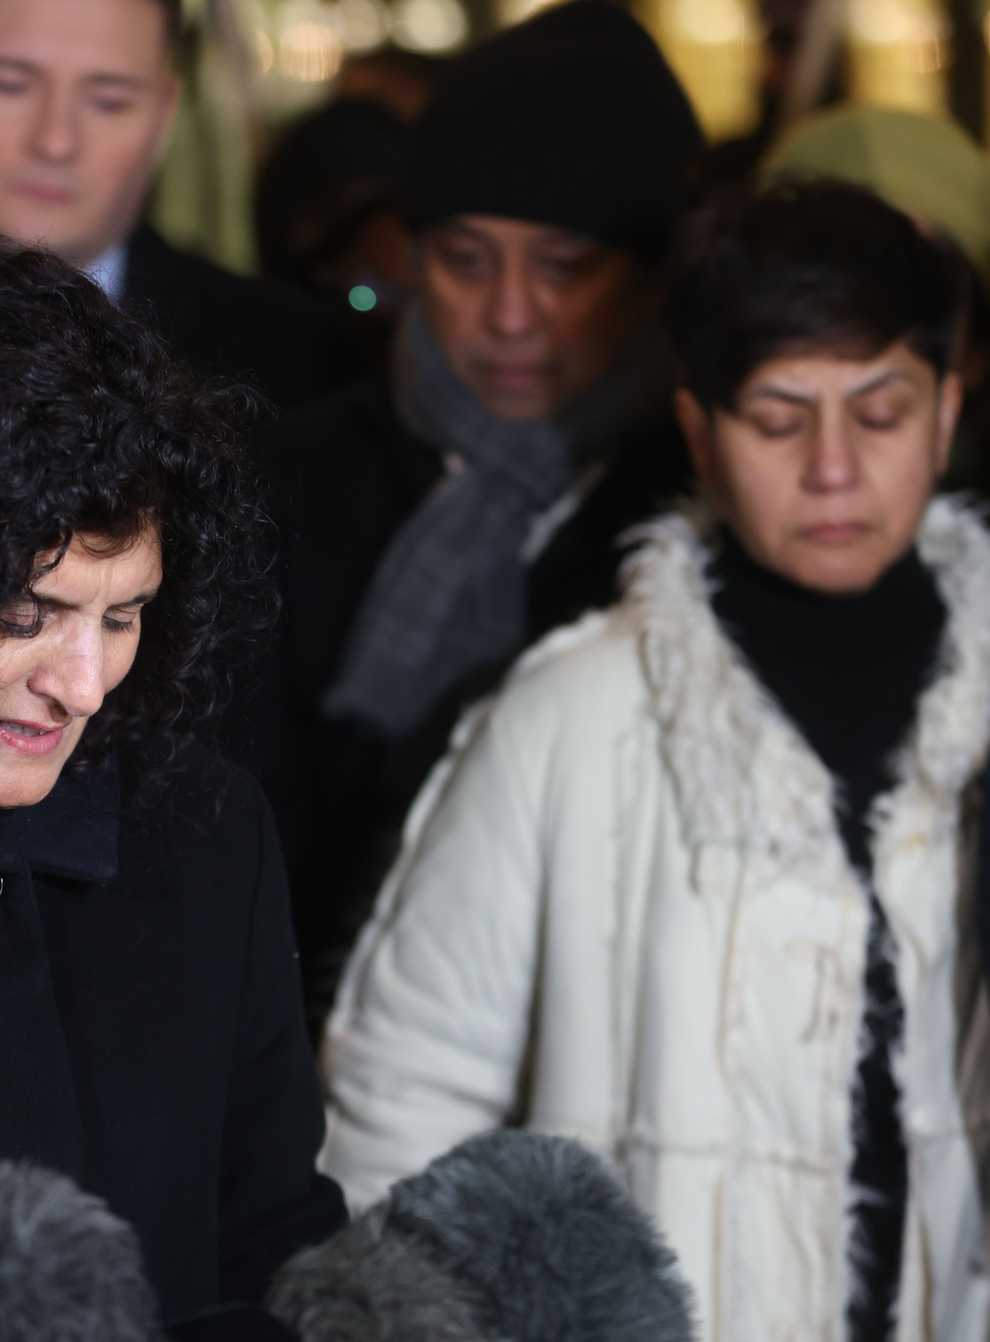 Farah Naz, Zara Aleena’s aunt reads a statement outside the Old Bailey in London (David Parry/PA)